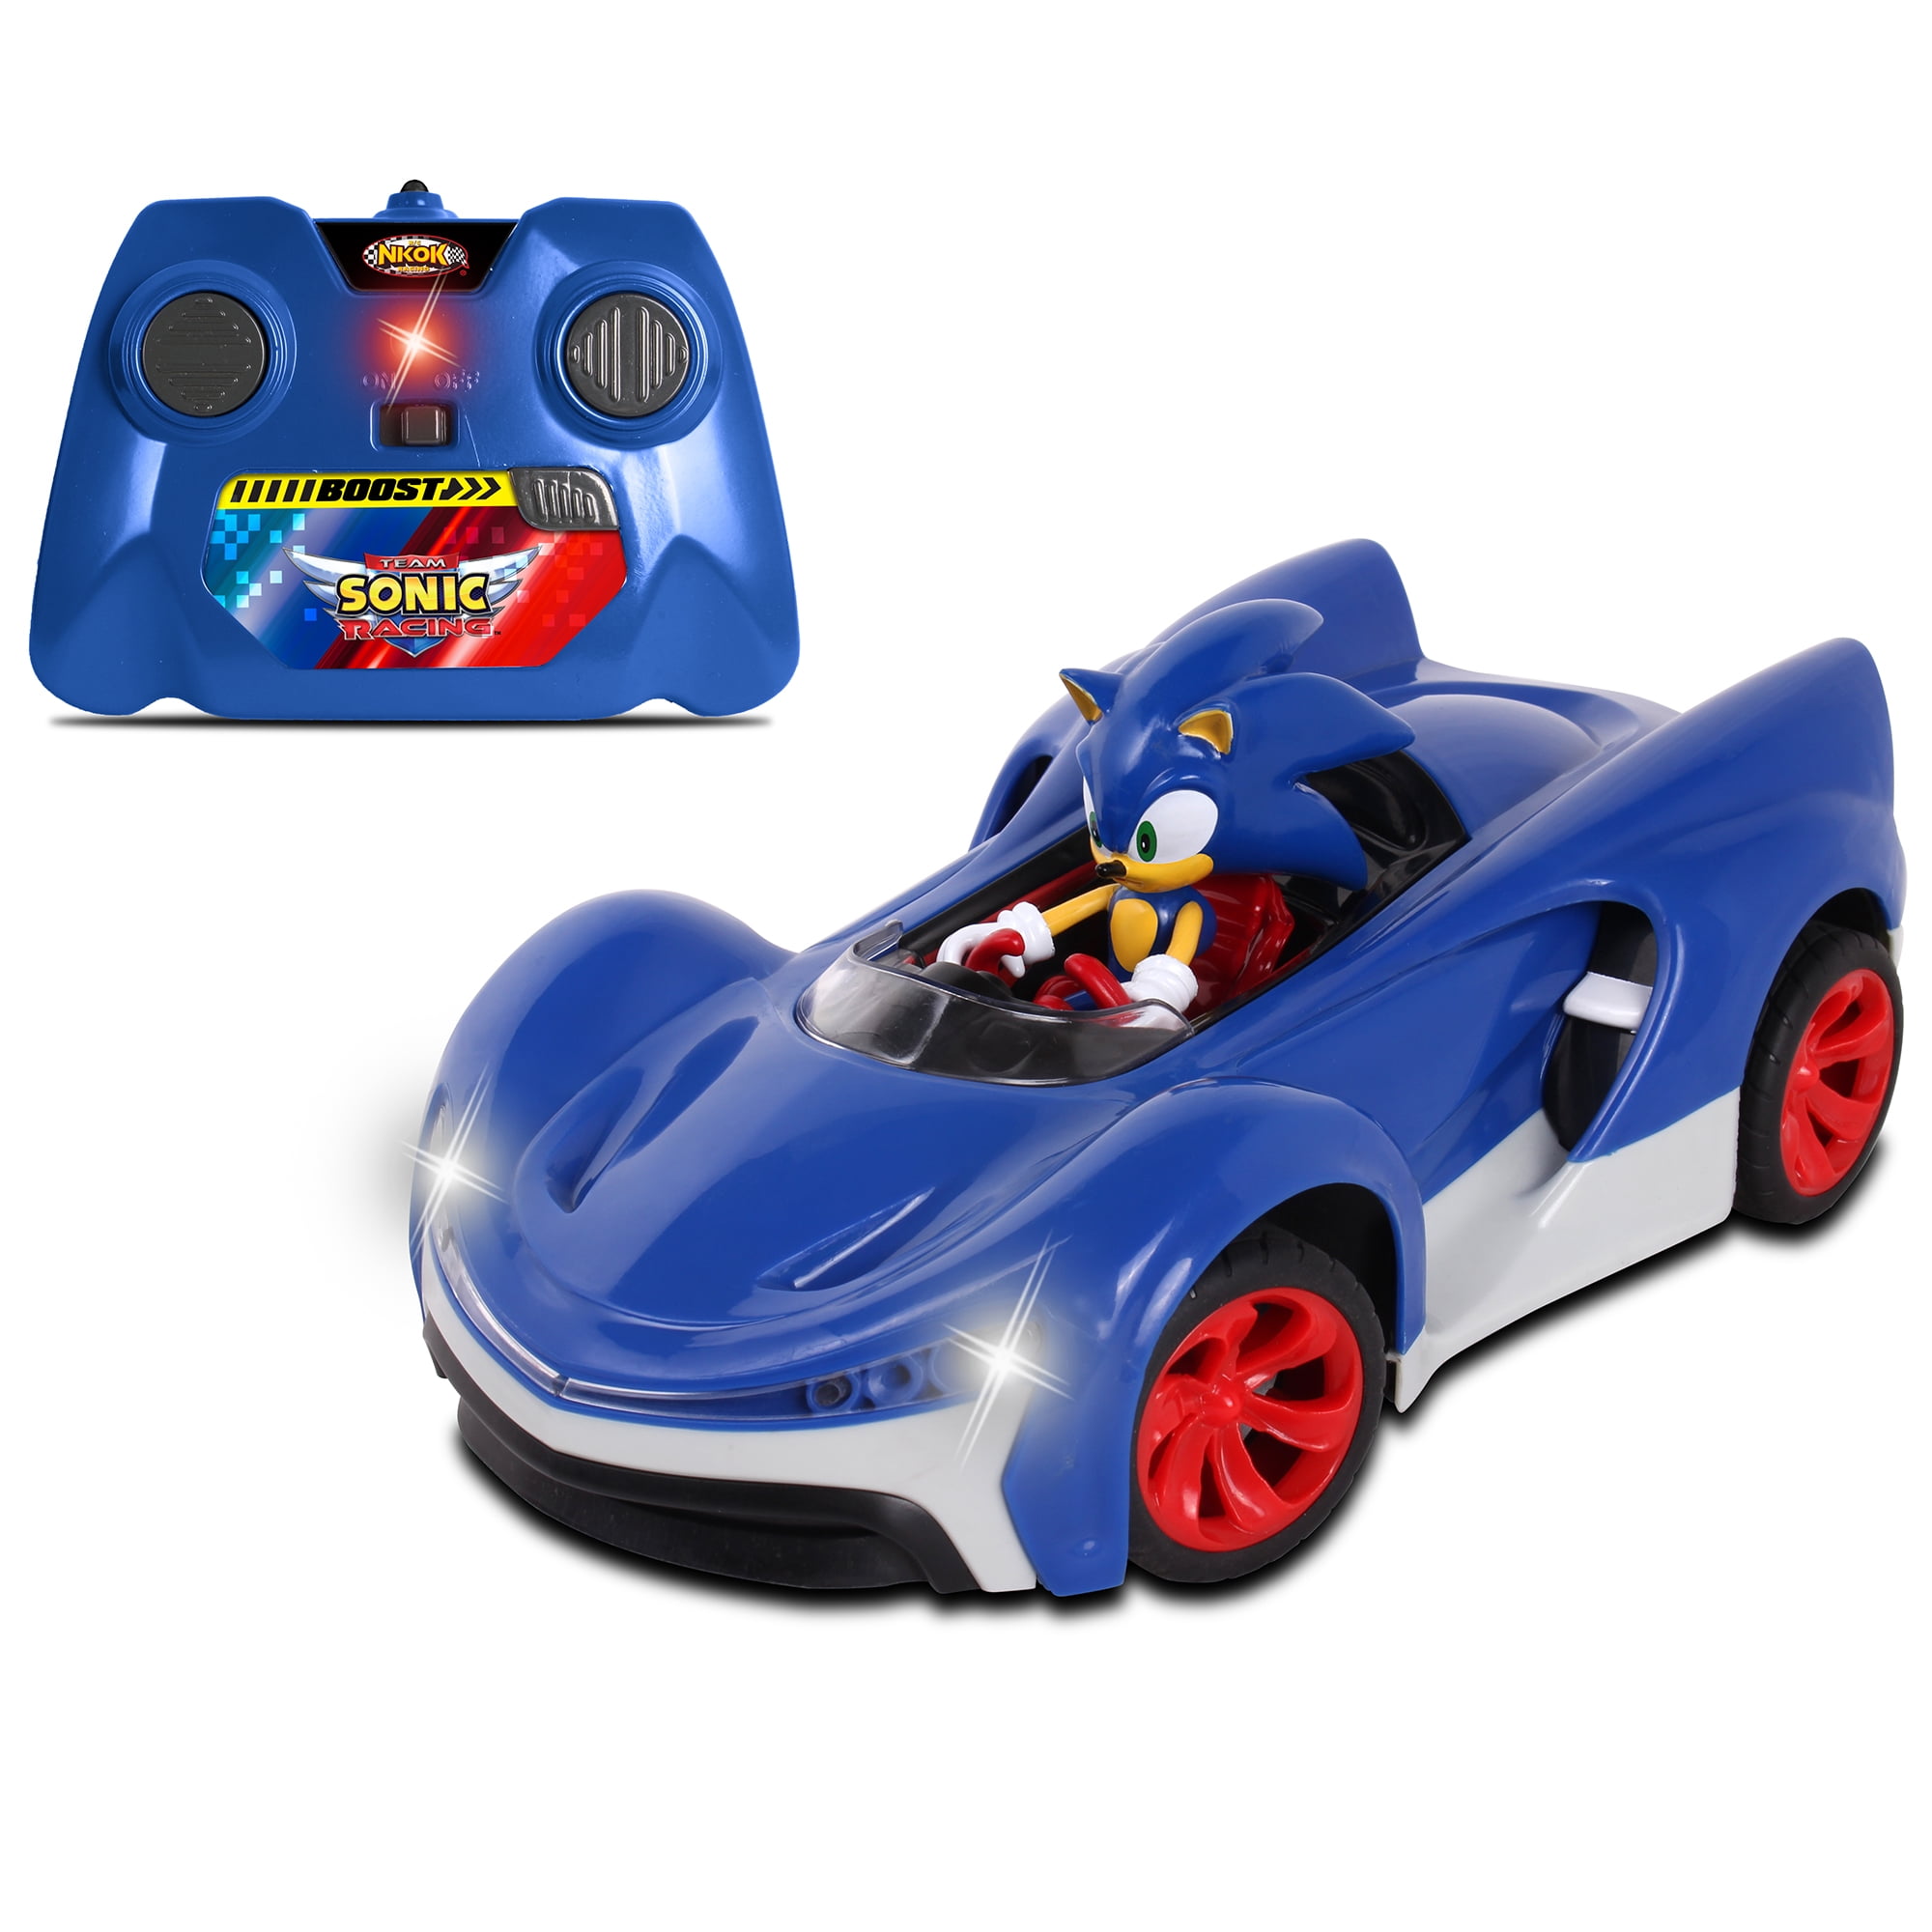 2.4Ghz NKOK Team Sonic Racing Remote Controlled Car with Turbo Boost 